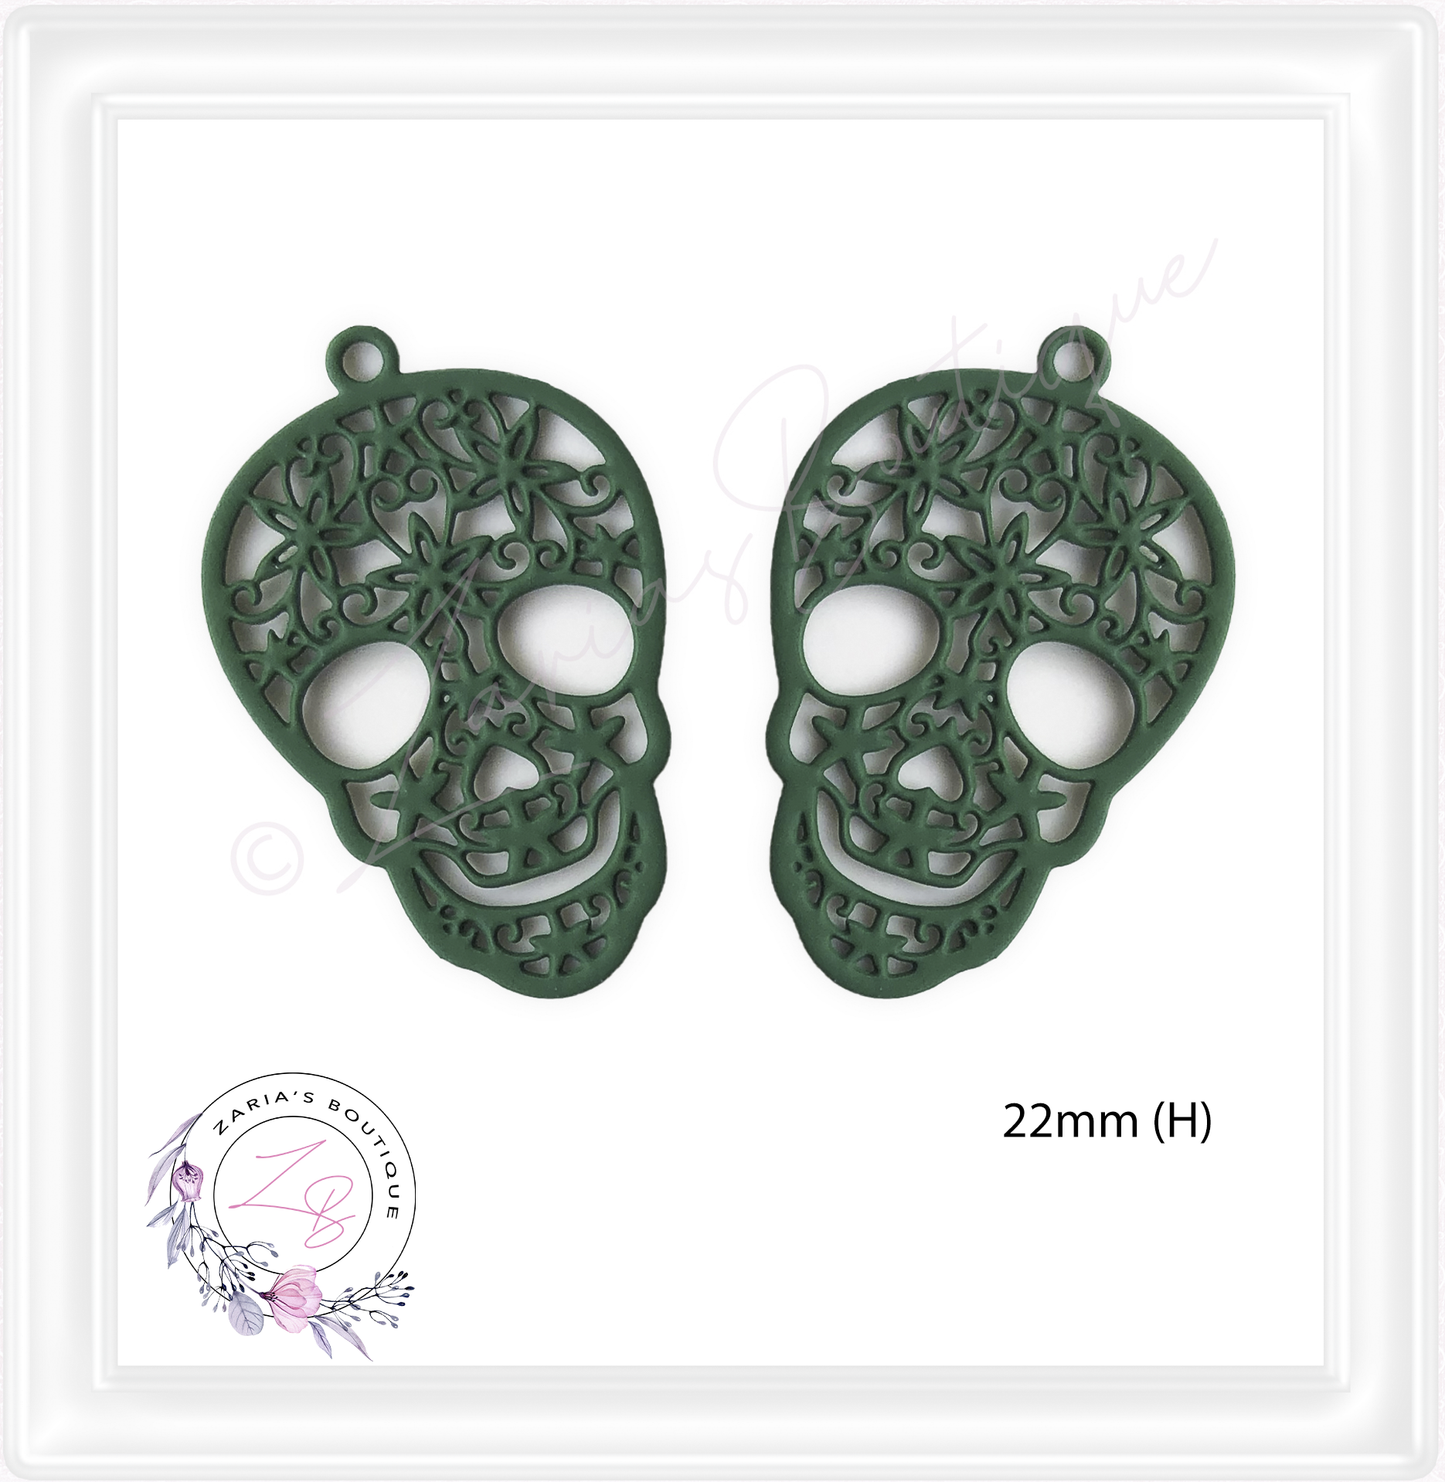 ⋅ Emerald Green Skull Earring Pendant Charms ⋅ Metal ⋅ 2 Pieces ⋅